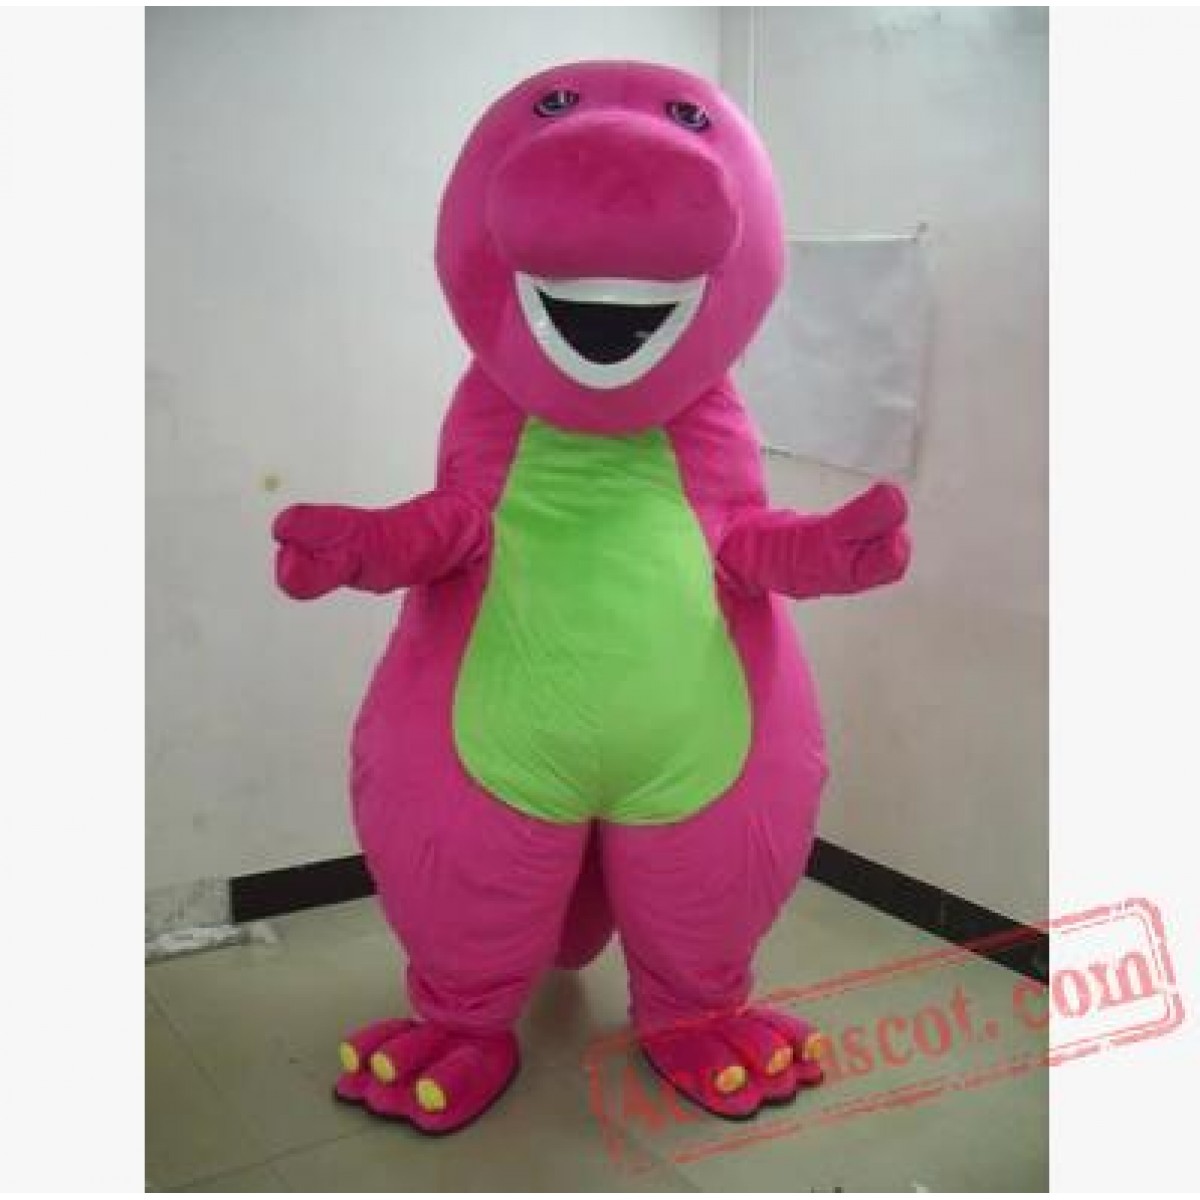 barney costume for adults